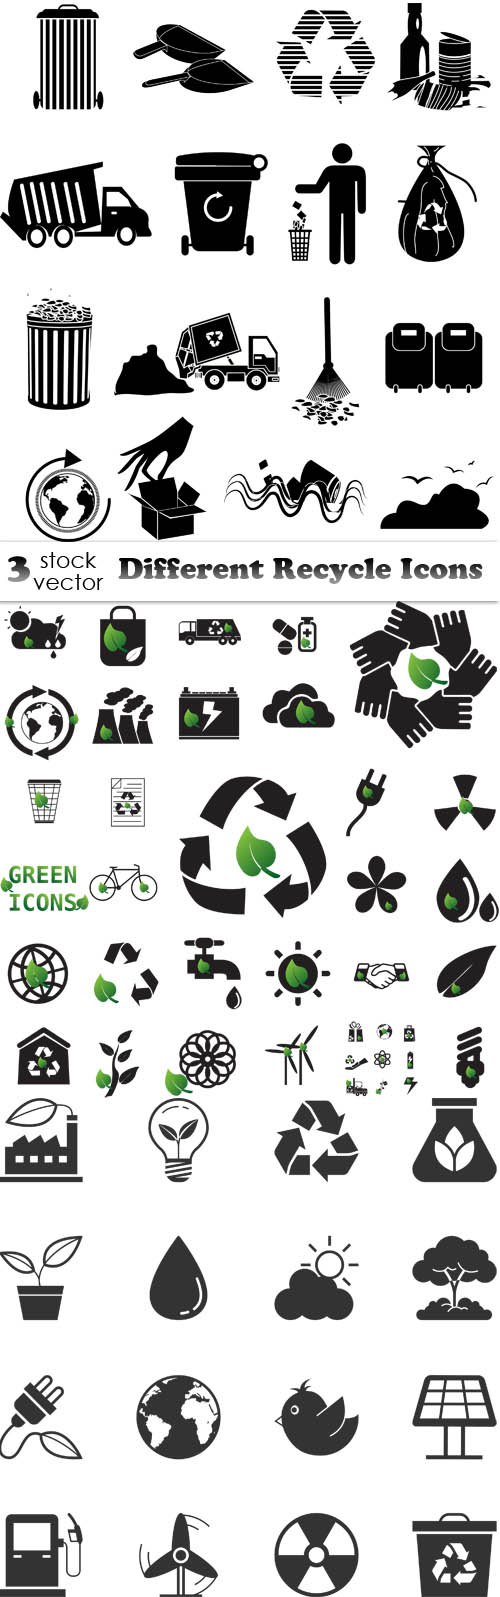 Vectors - Different Recycle Icons